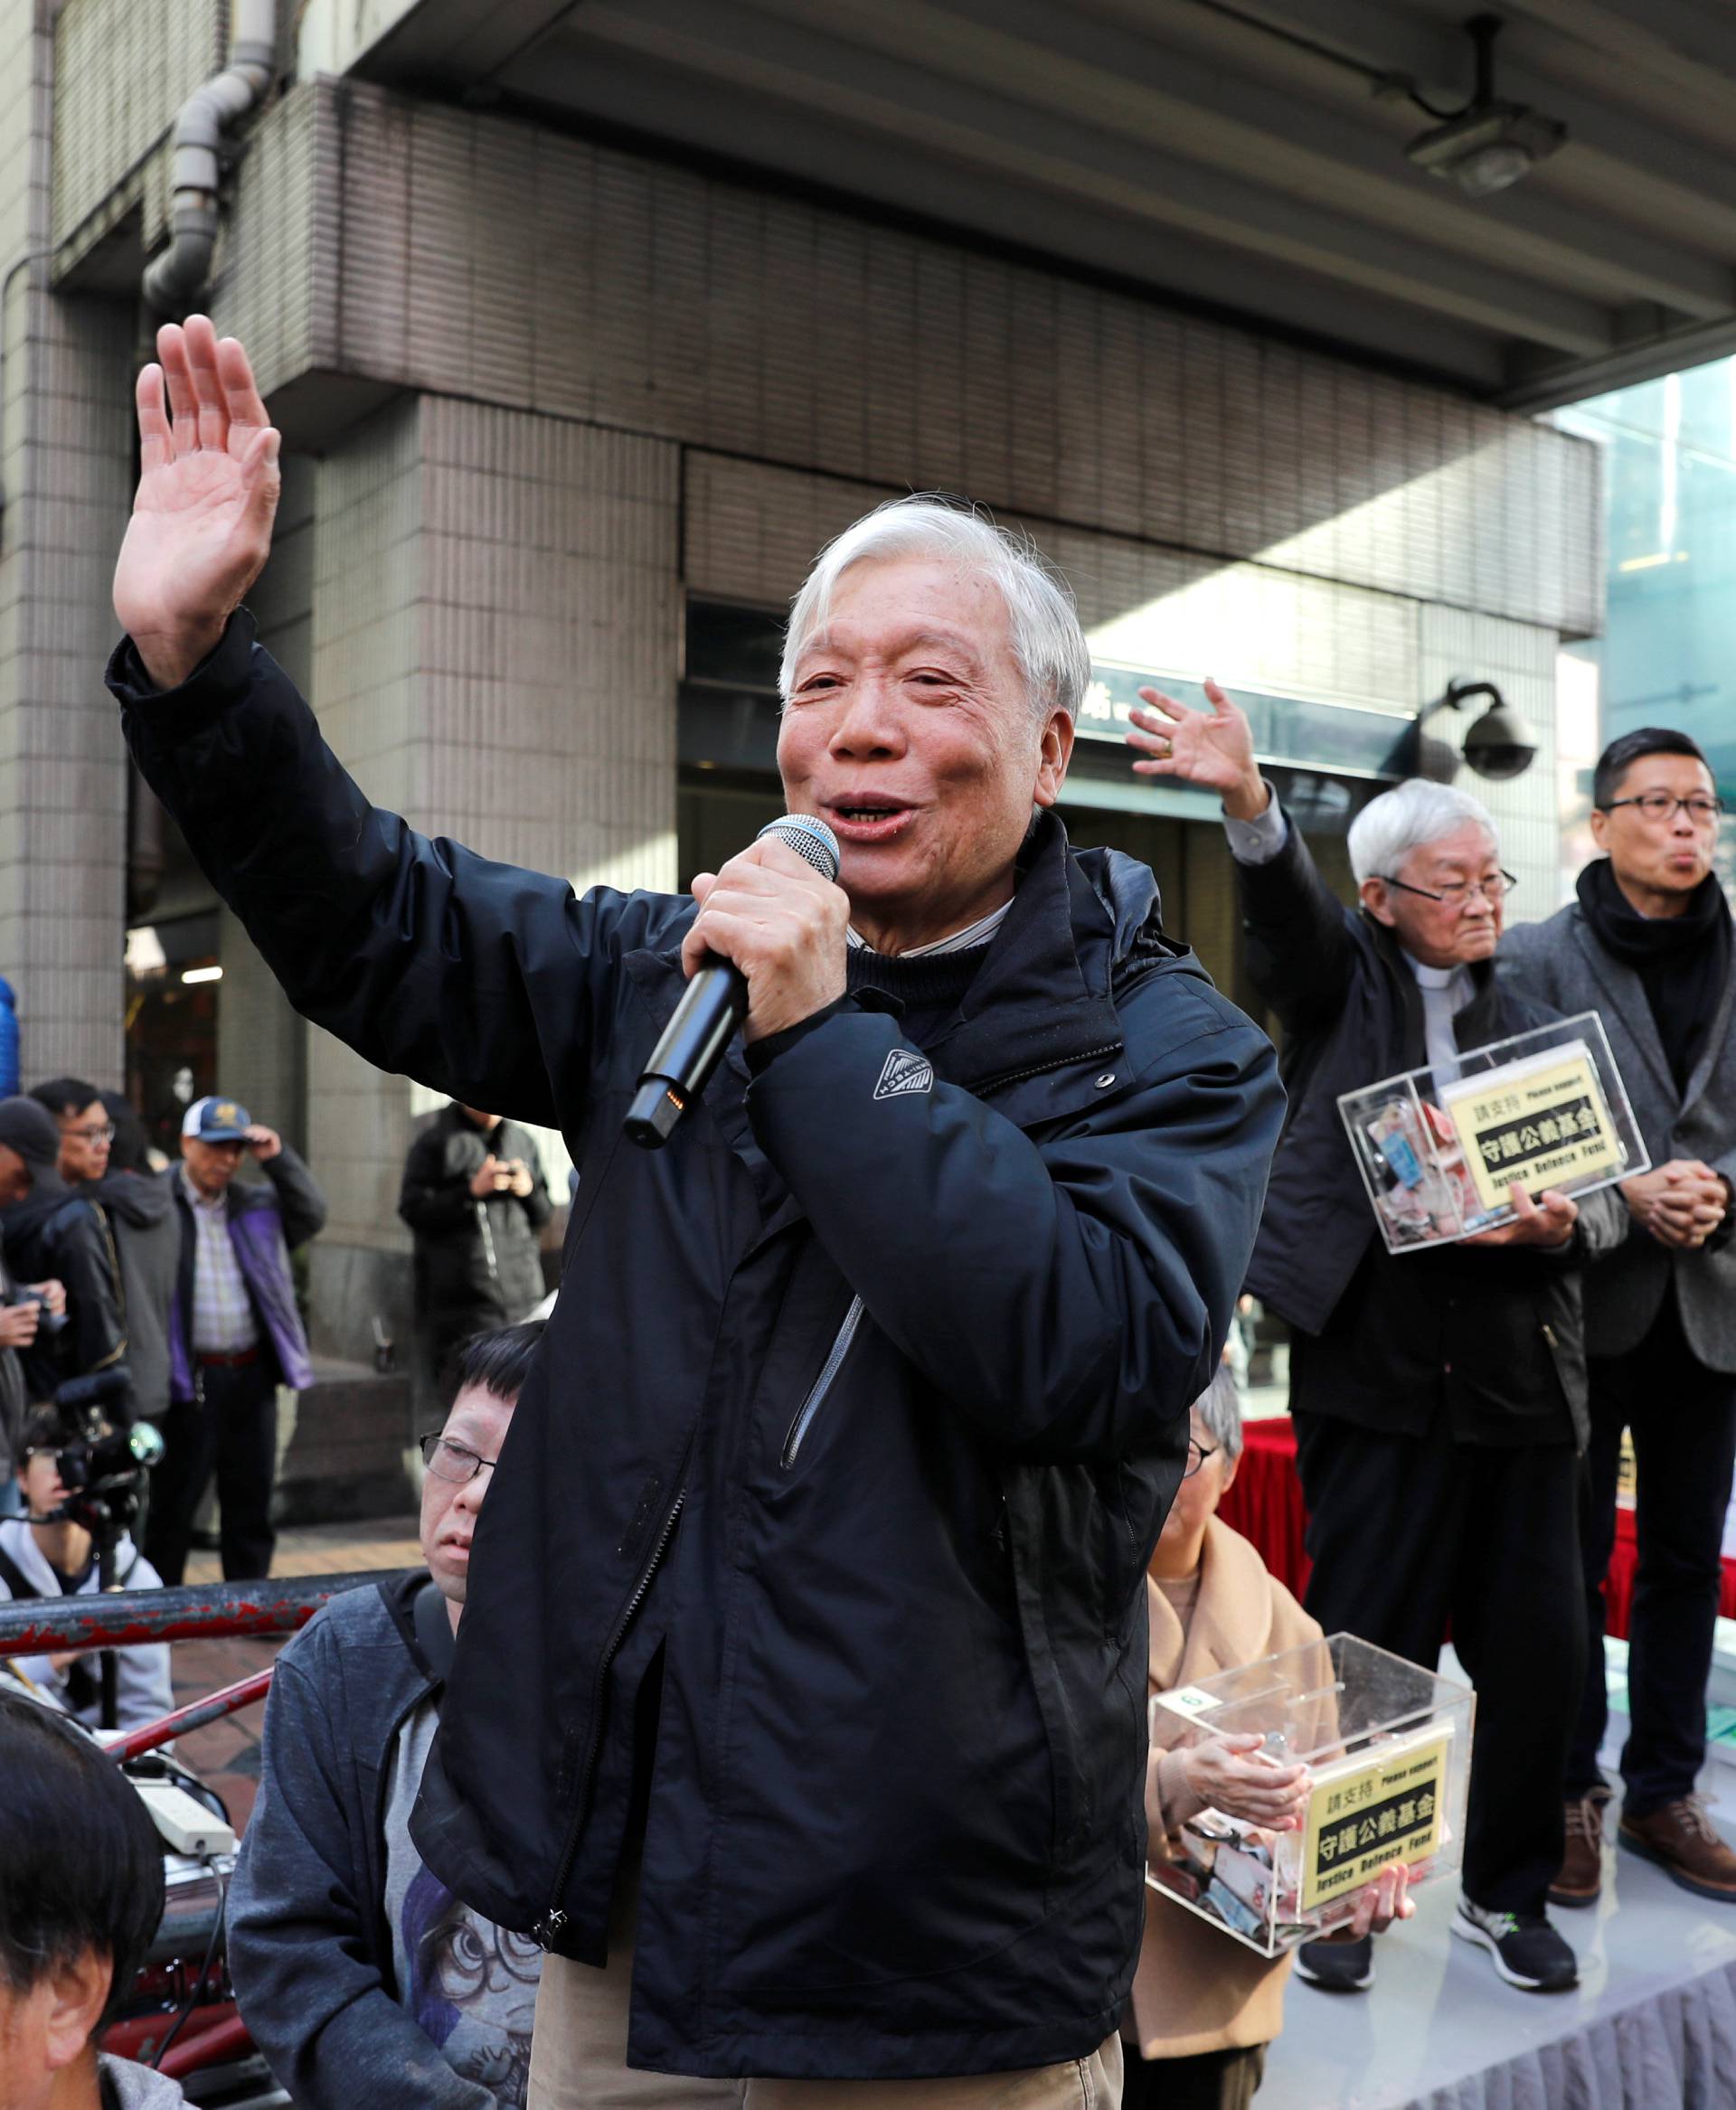 Occupy Central pro-democracy movement founder Chu Yiu-ming, waves to supporters as he takes part in an annual New Year's Day march in Hong Kong